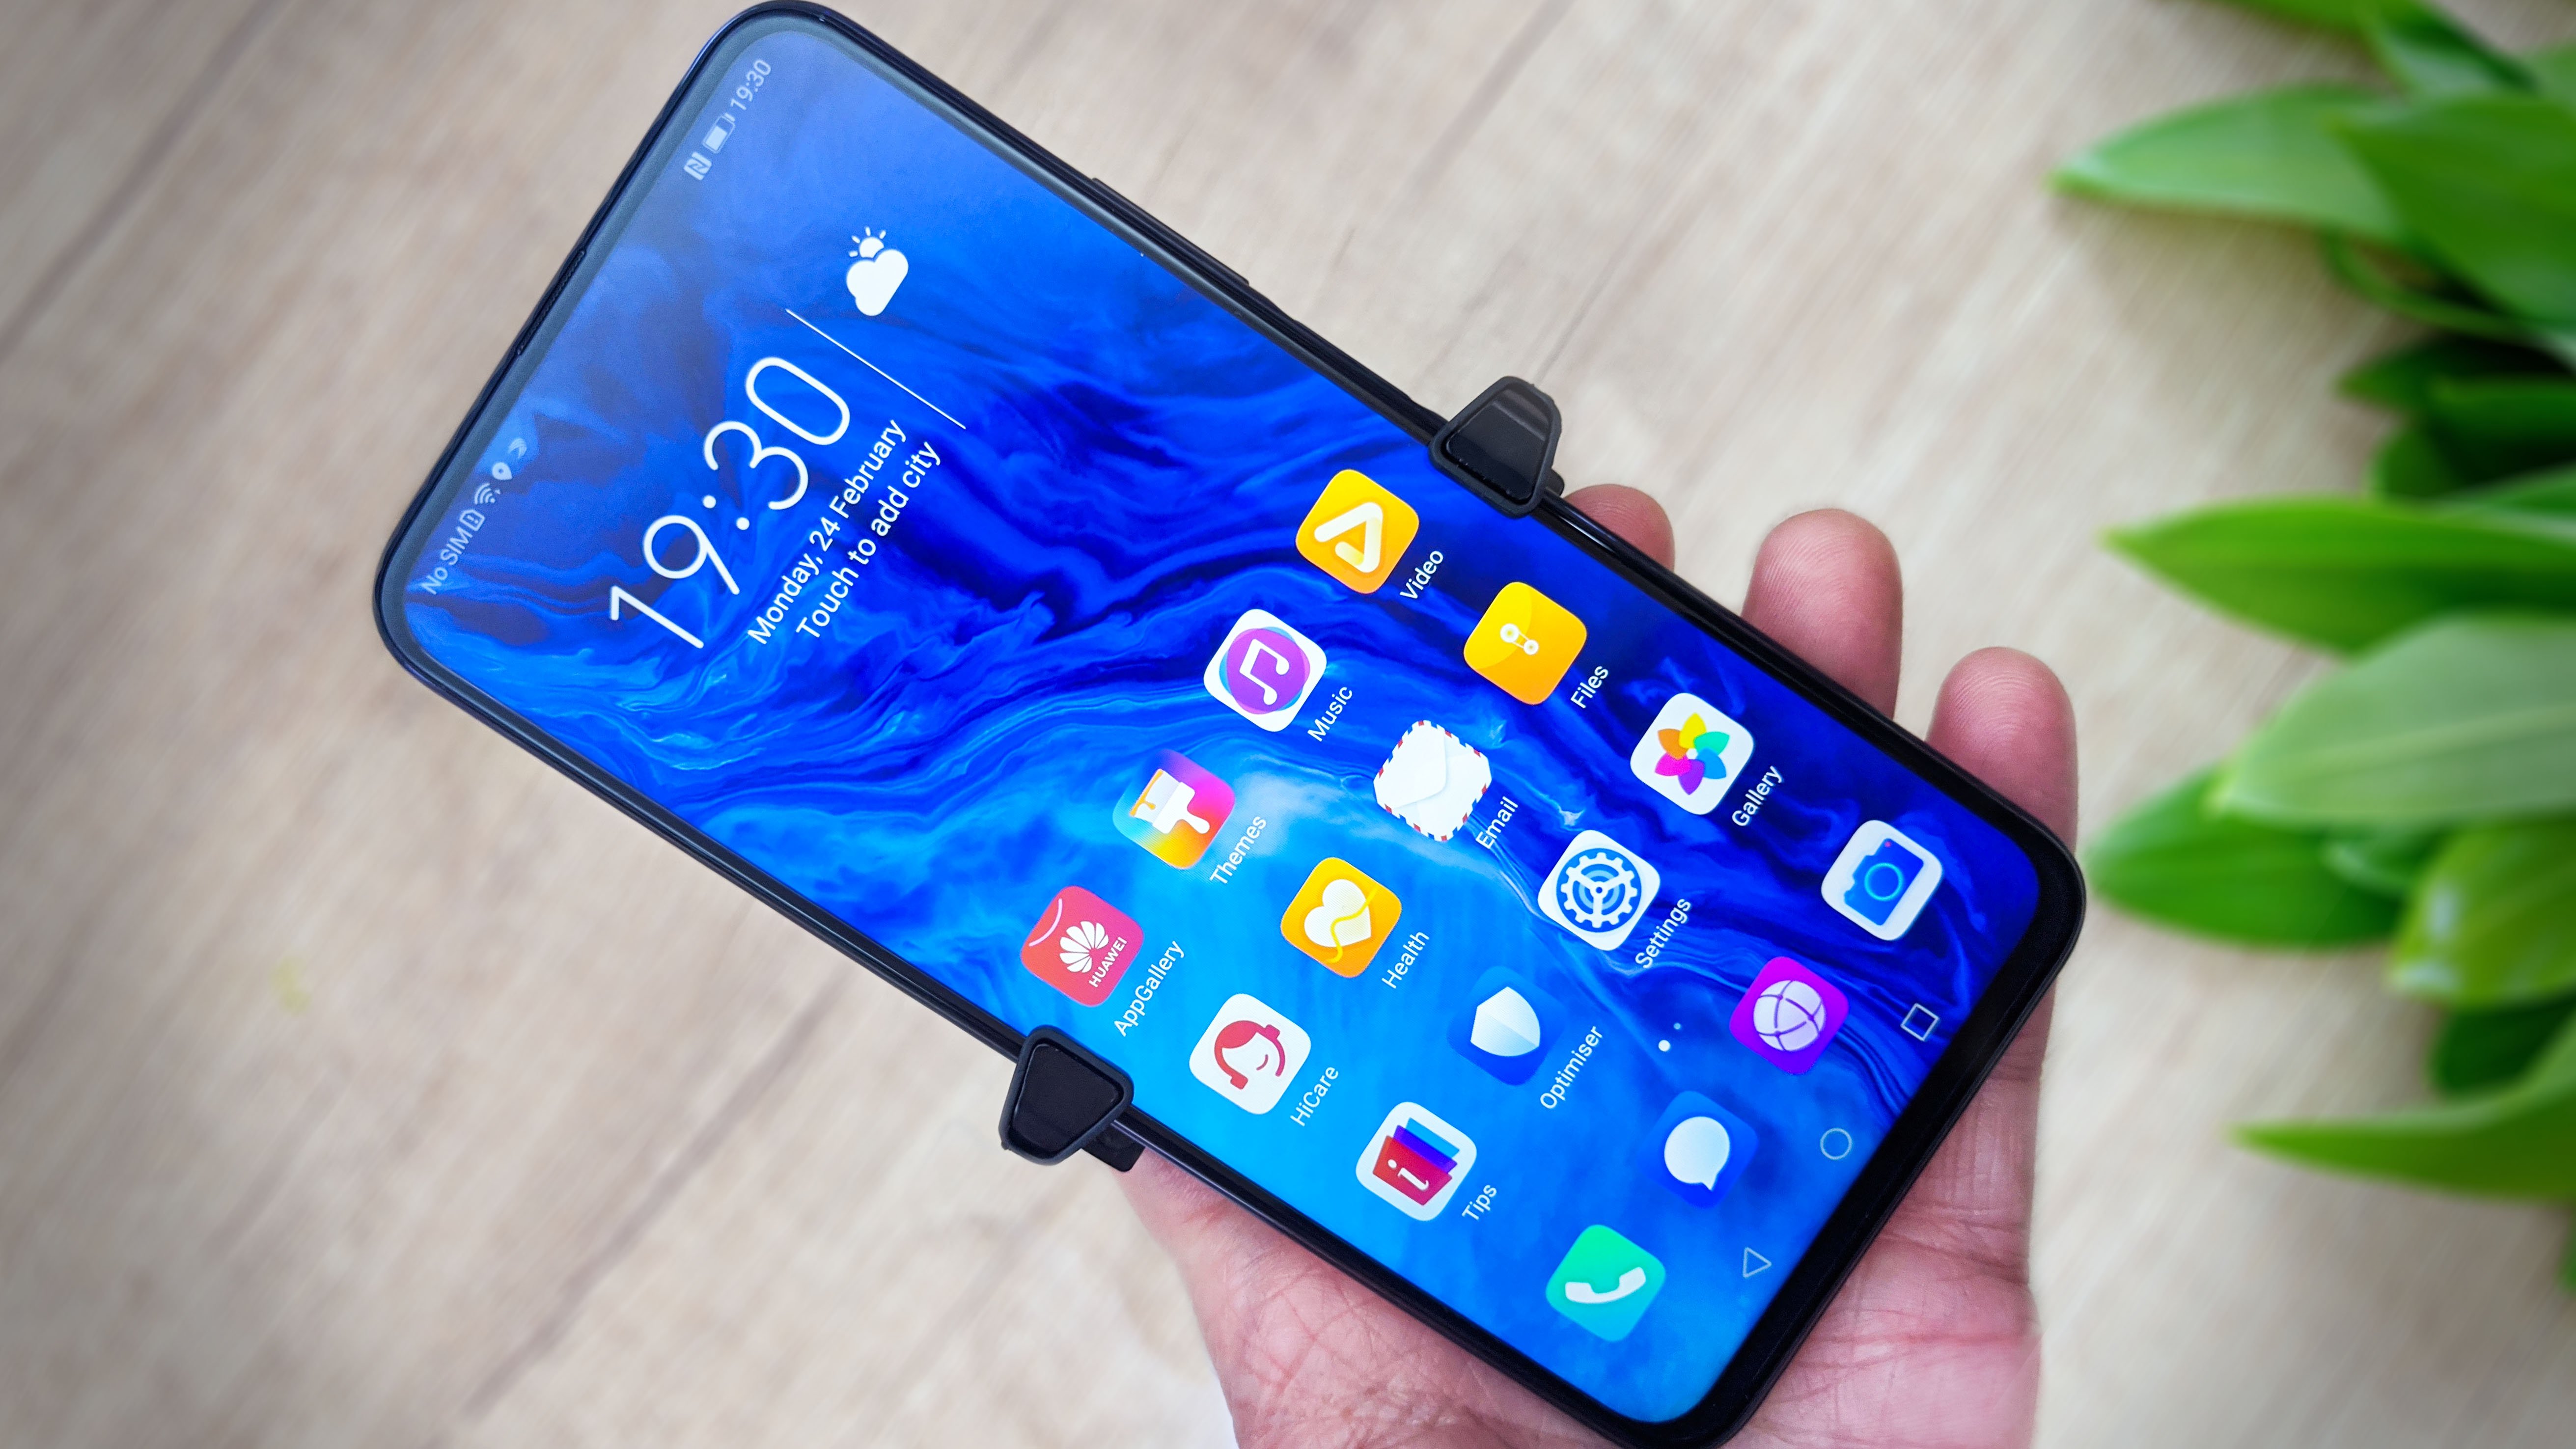 cell phone number location app Honor 9X